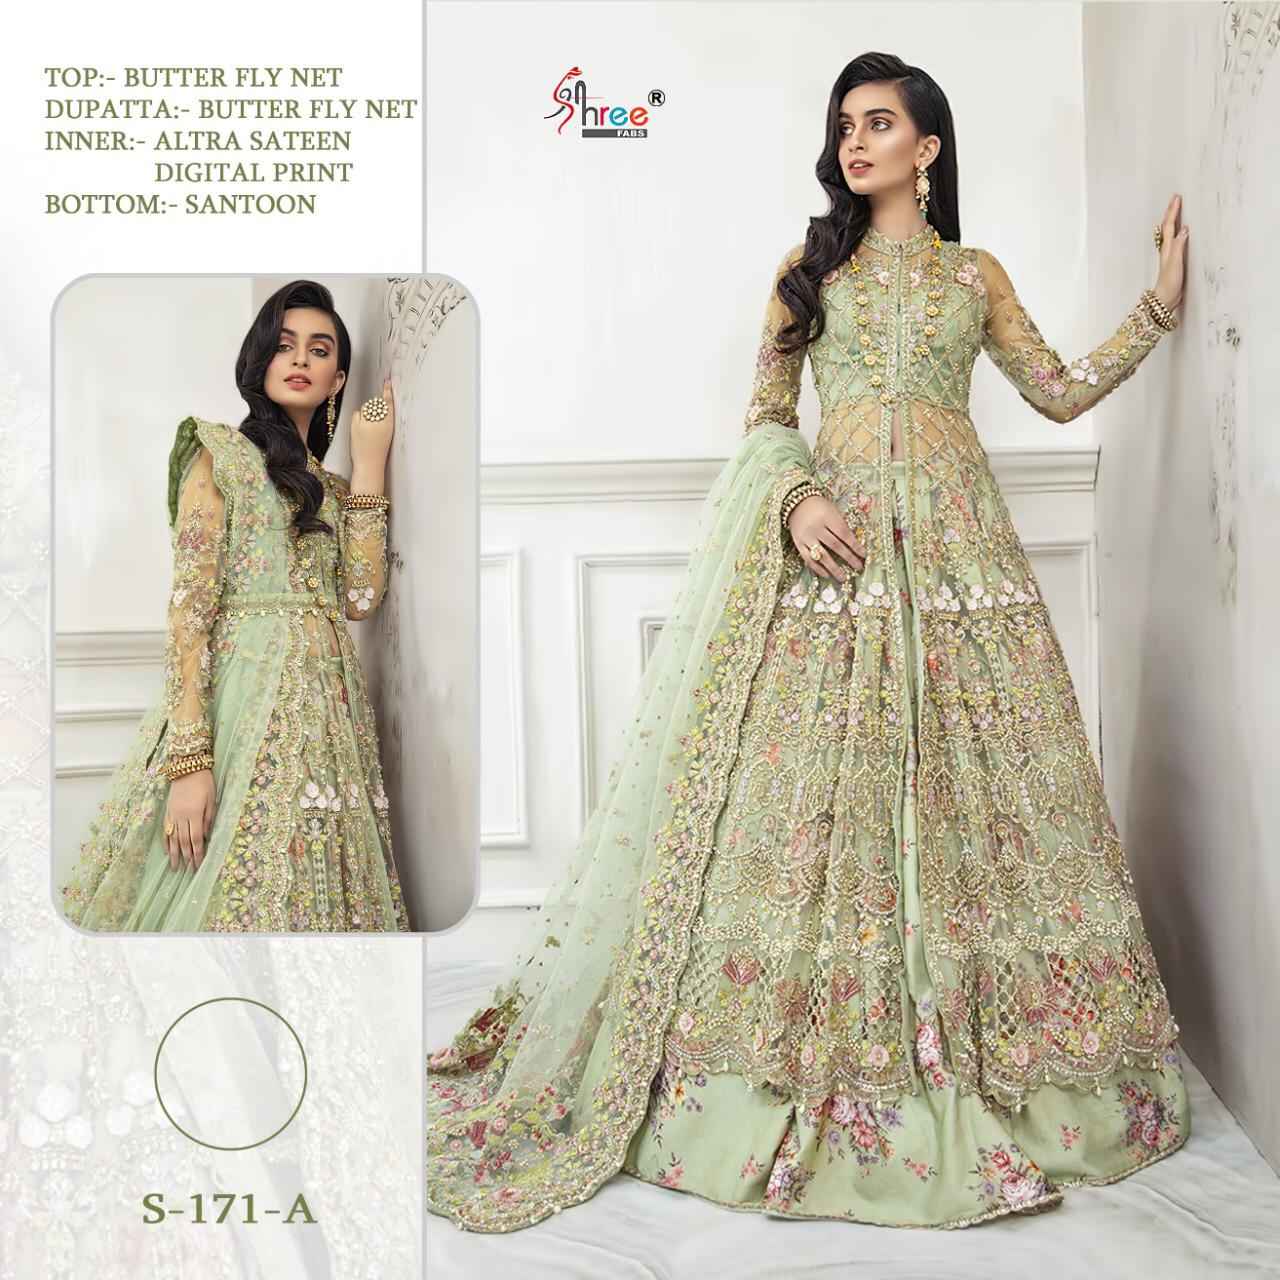 SHREE FABS S 171 A WITH FREE SHIPPING IN INDIA